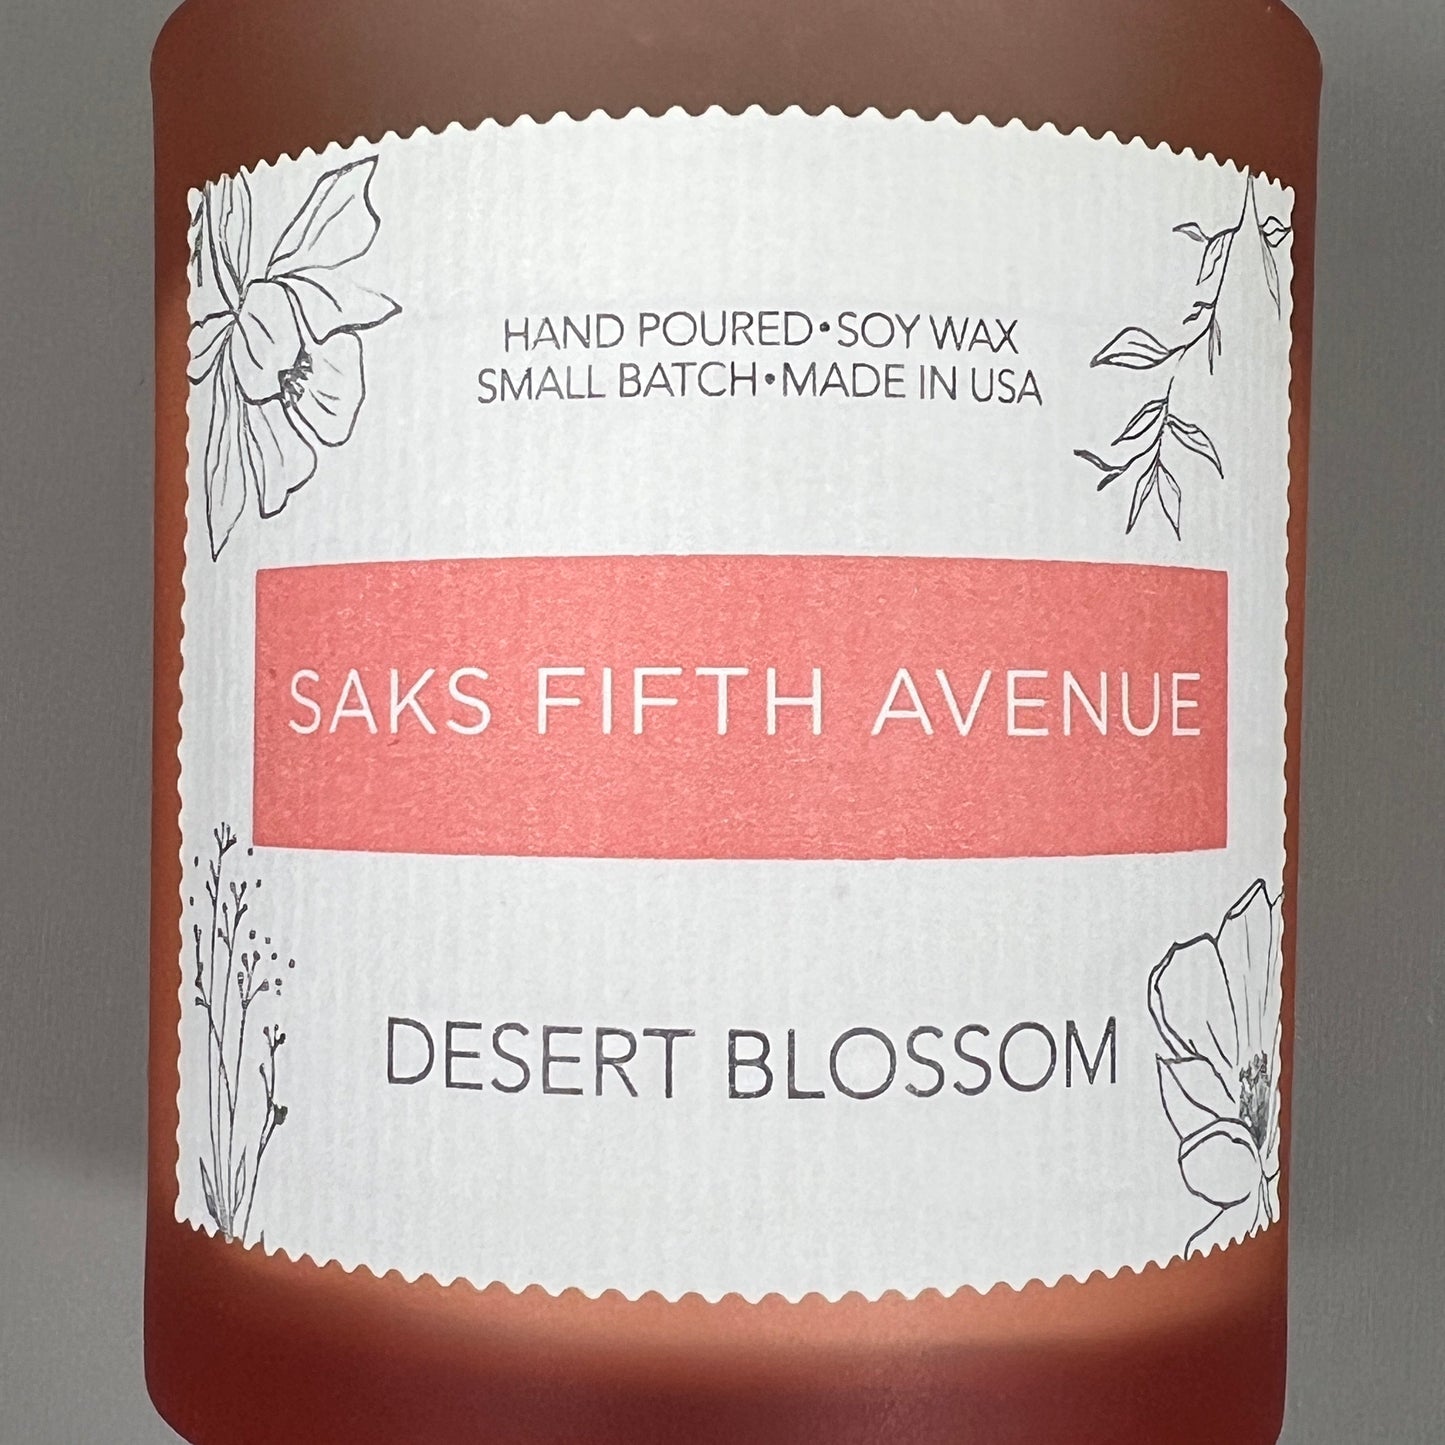 SAKS FIFTH AVENUE Desert Blossom Hand Poured Soy Wax Candle 8 fl oz LOT OF 4! (New)